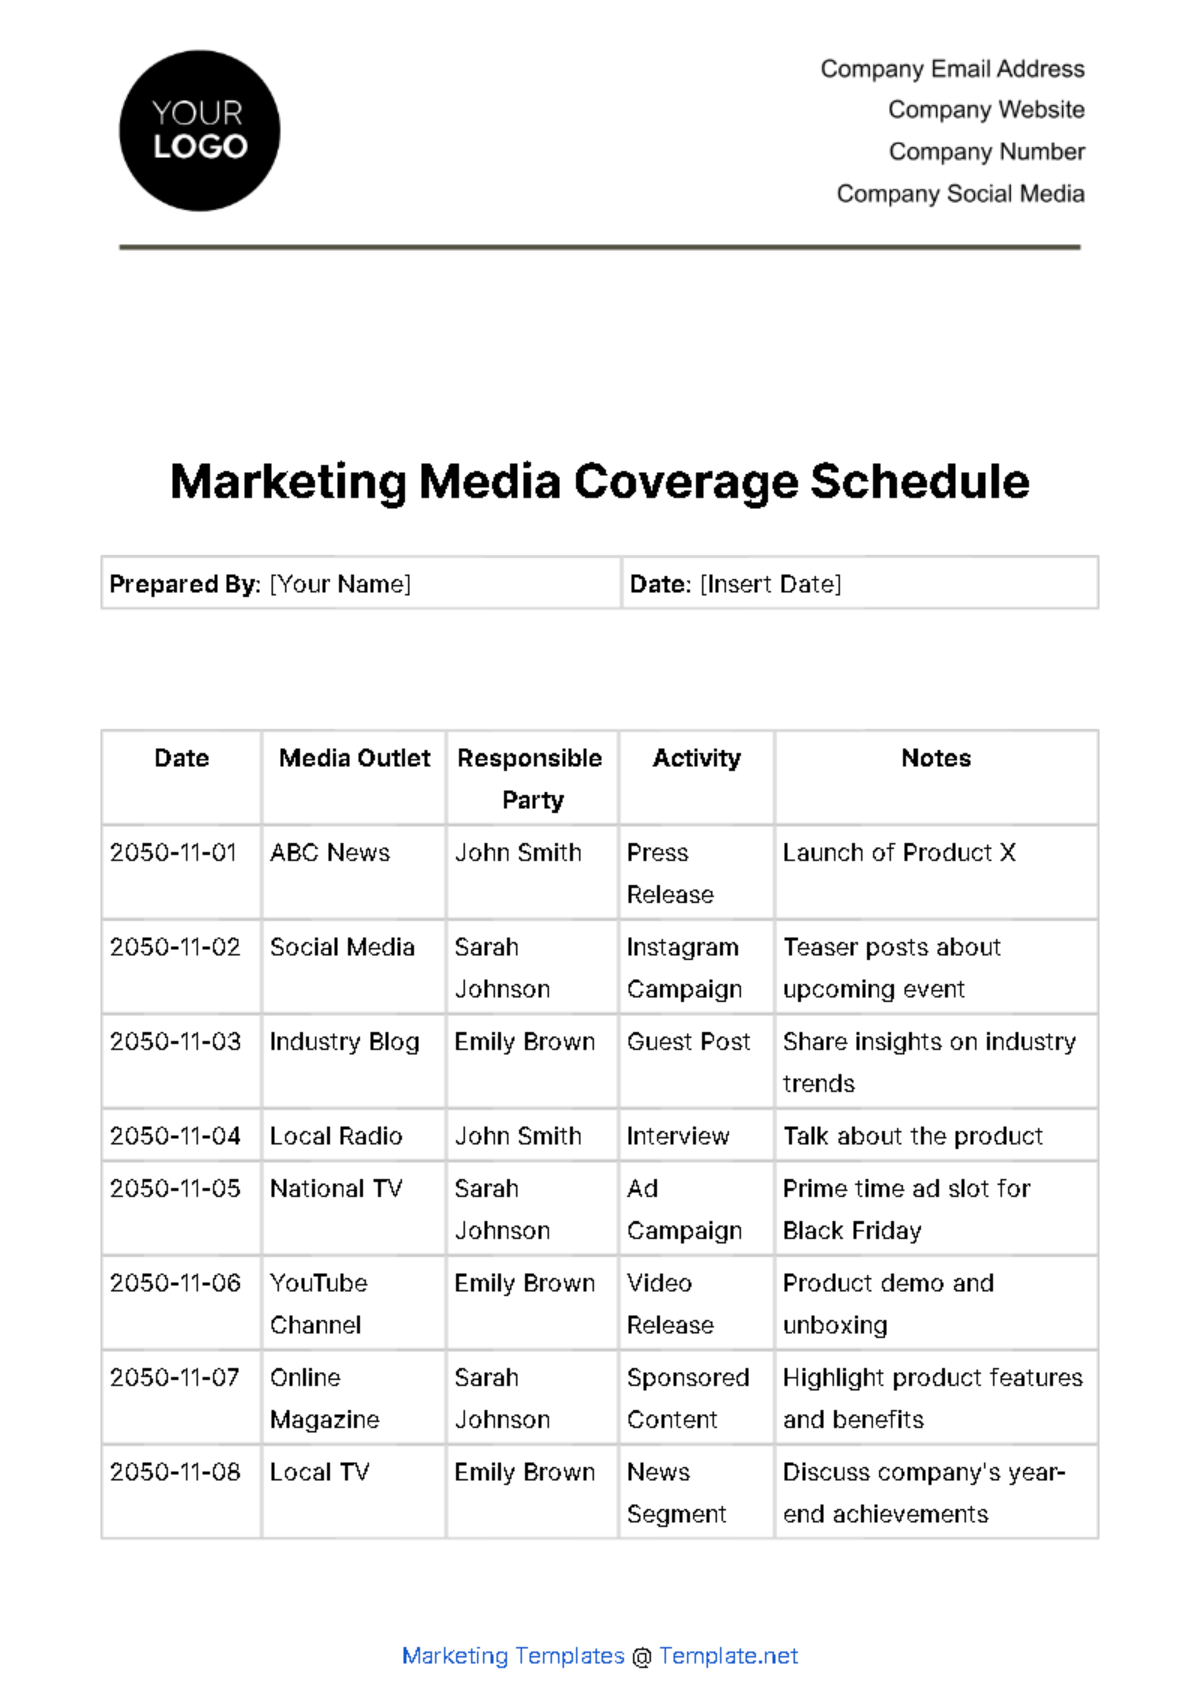 Free Marketing Media Coverage Schedule Template